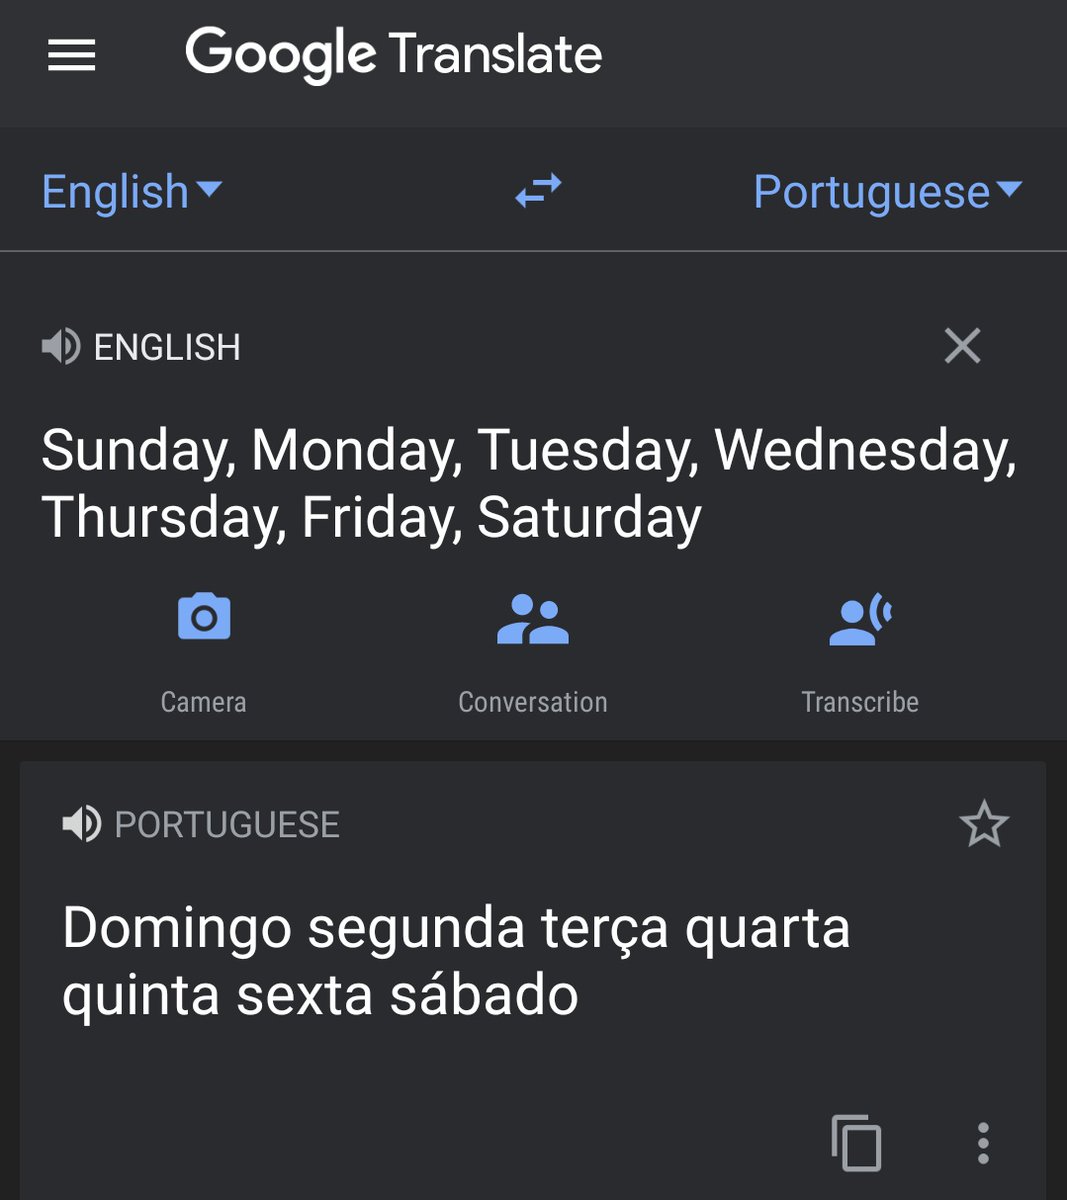 I mean you jest but like Portuguese actually almost does this  https://twitter.com/kraker2k/status/1311196213396598784?s=19